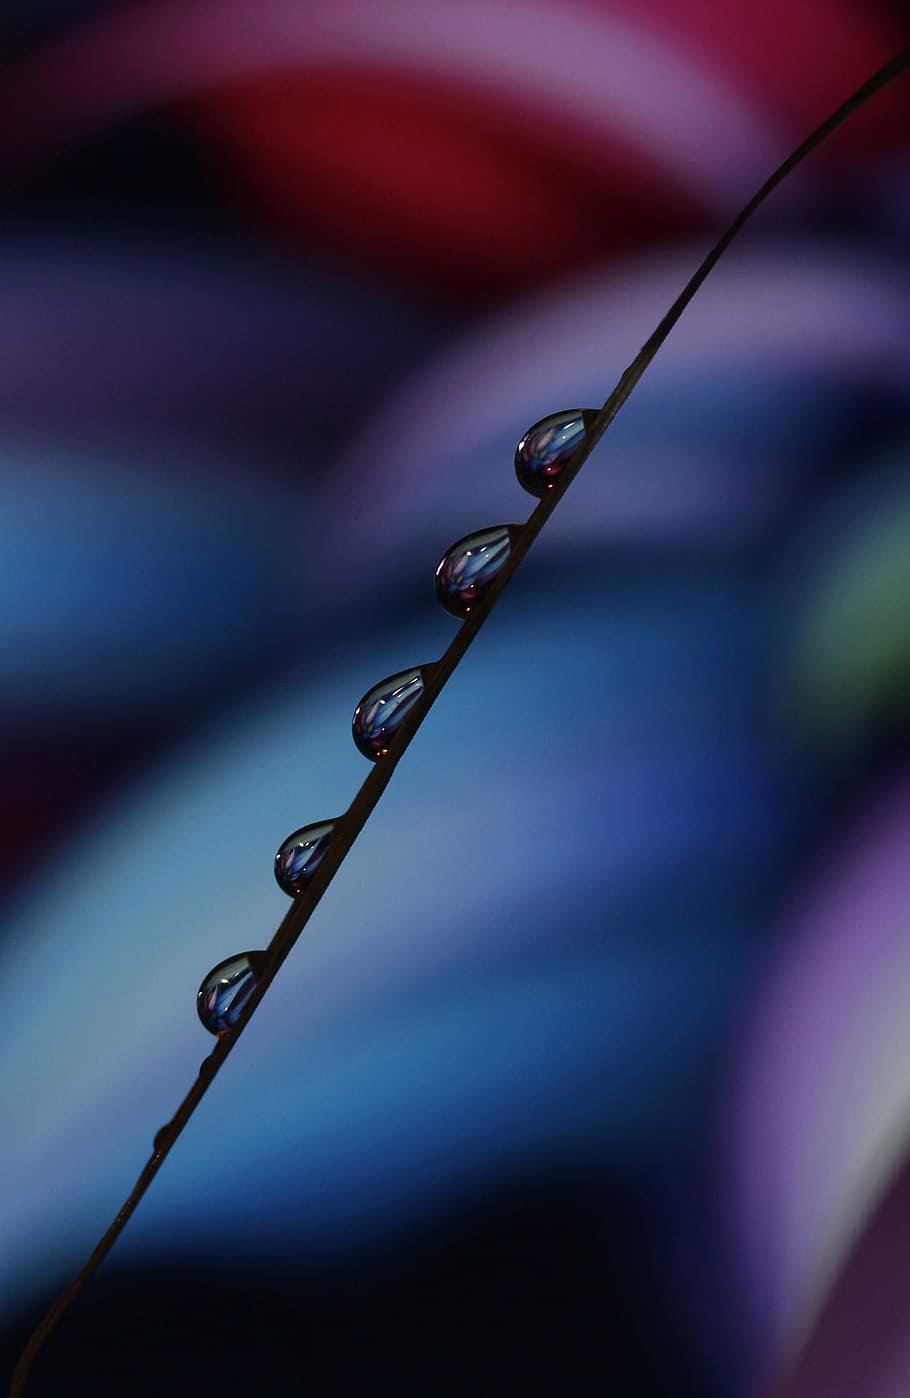 drops, macro, reflection, water, close-up, selective focus, focus on foreground, plant, nature, drop